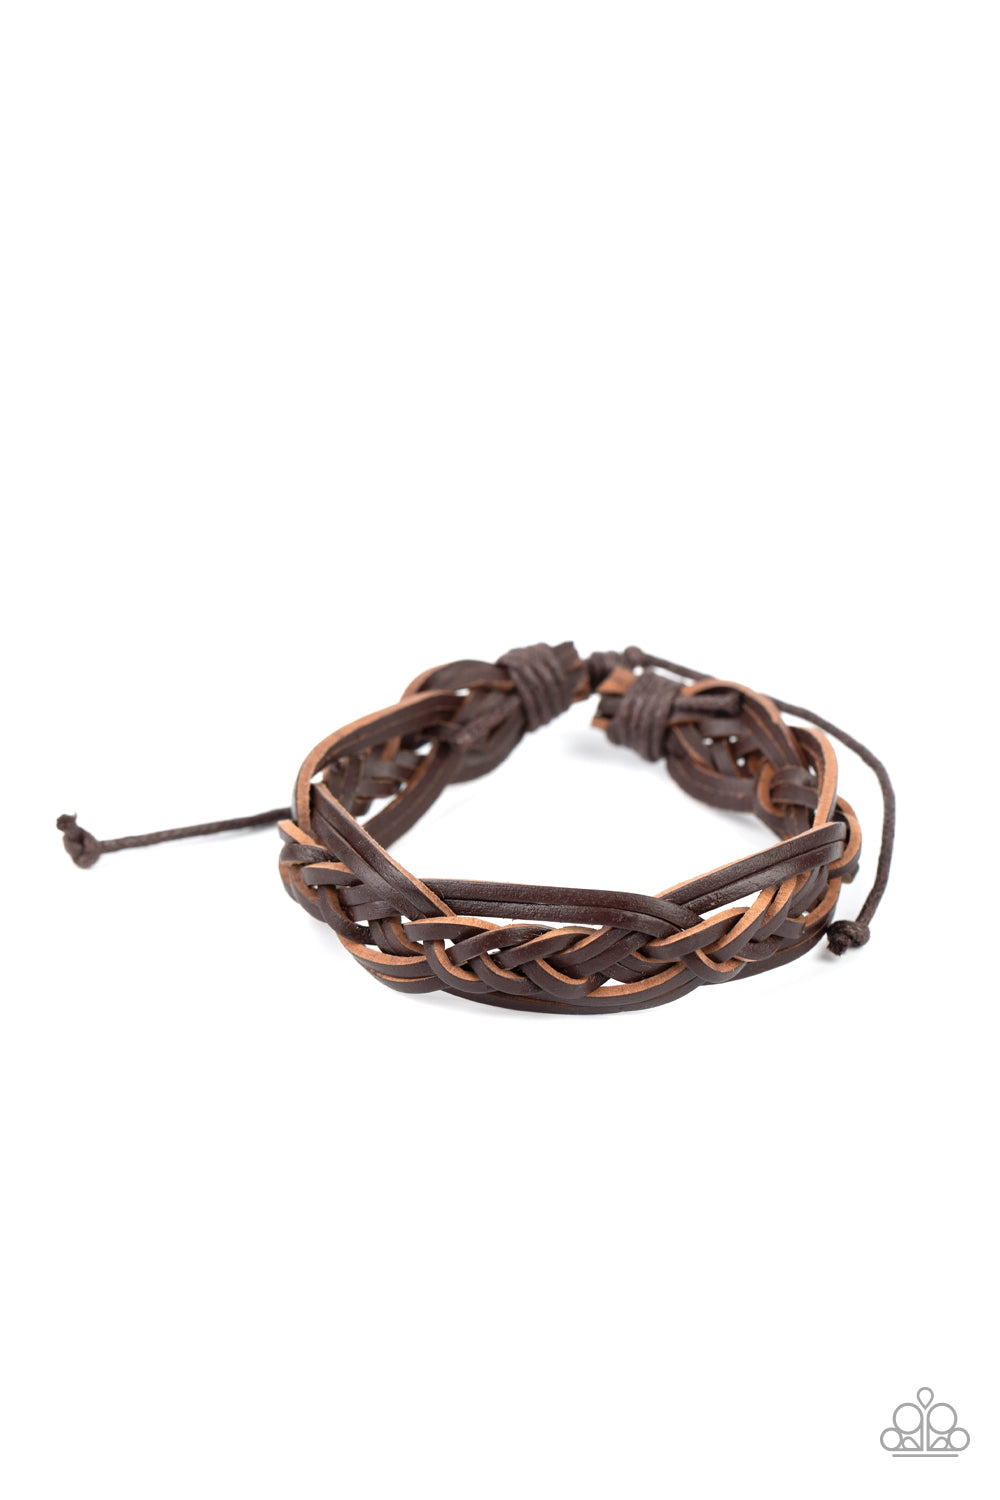 five-dollar-jewelry-too-close-to-homespun-brown-bracelet-paparazzi-accessories